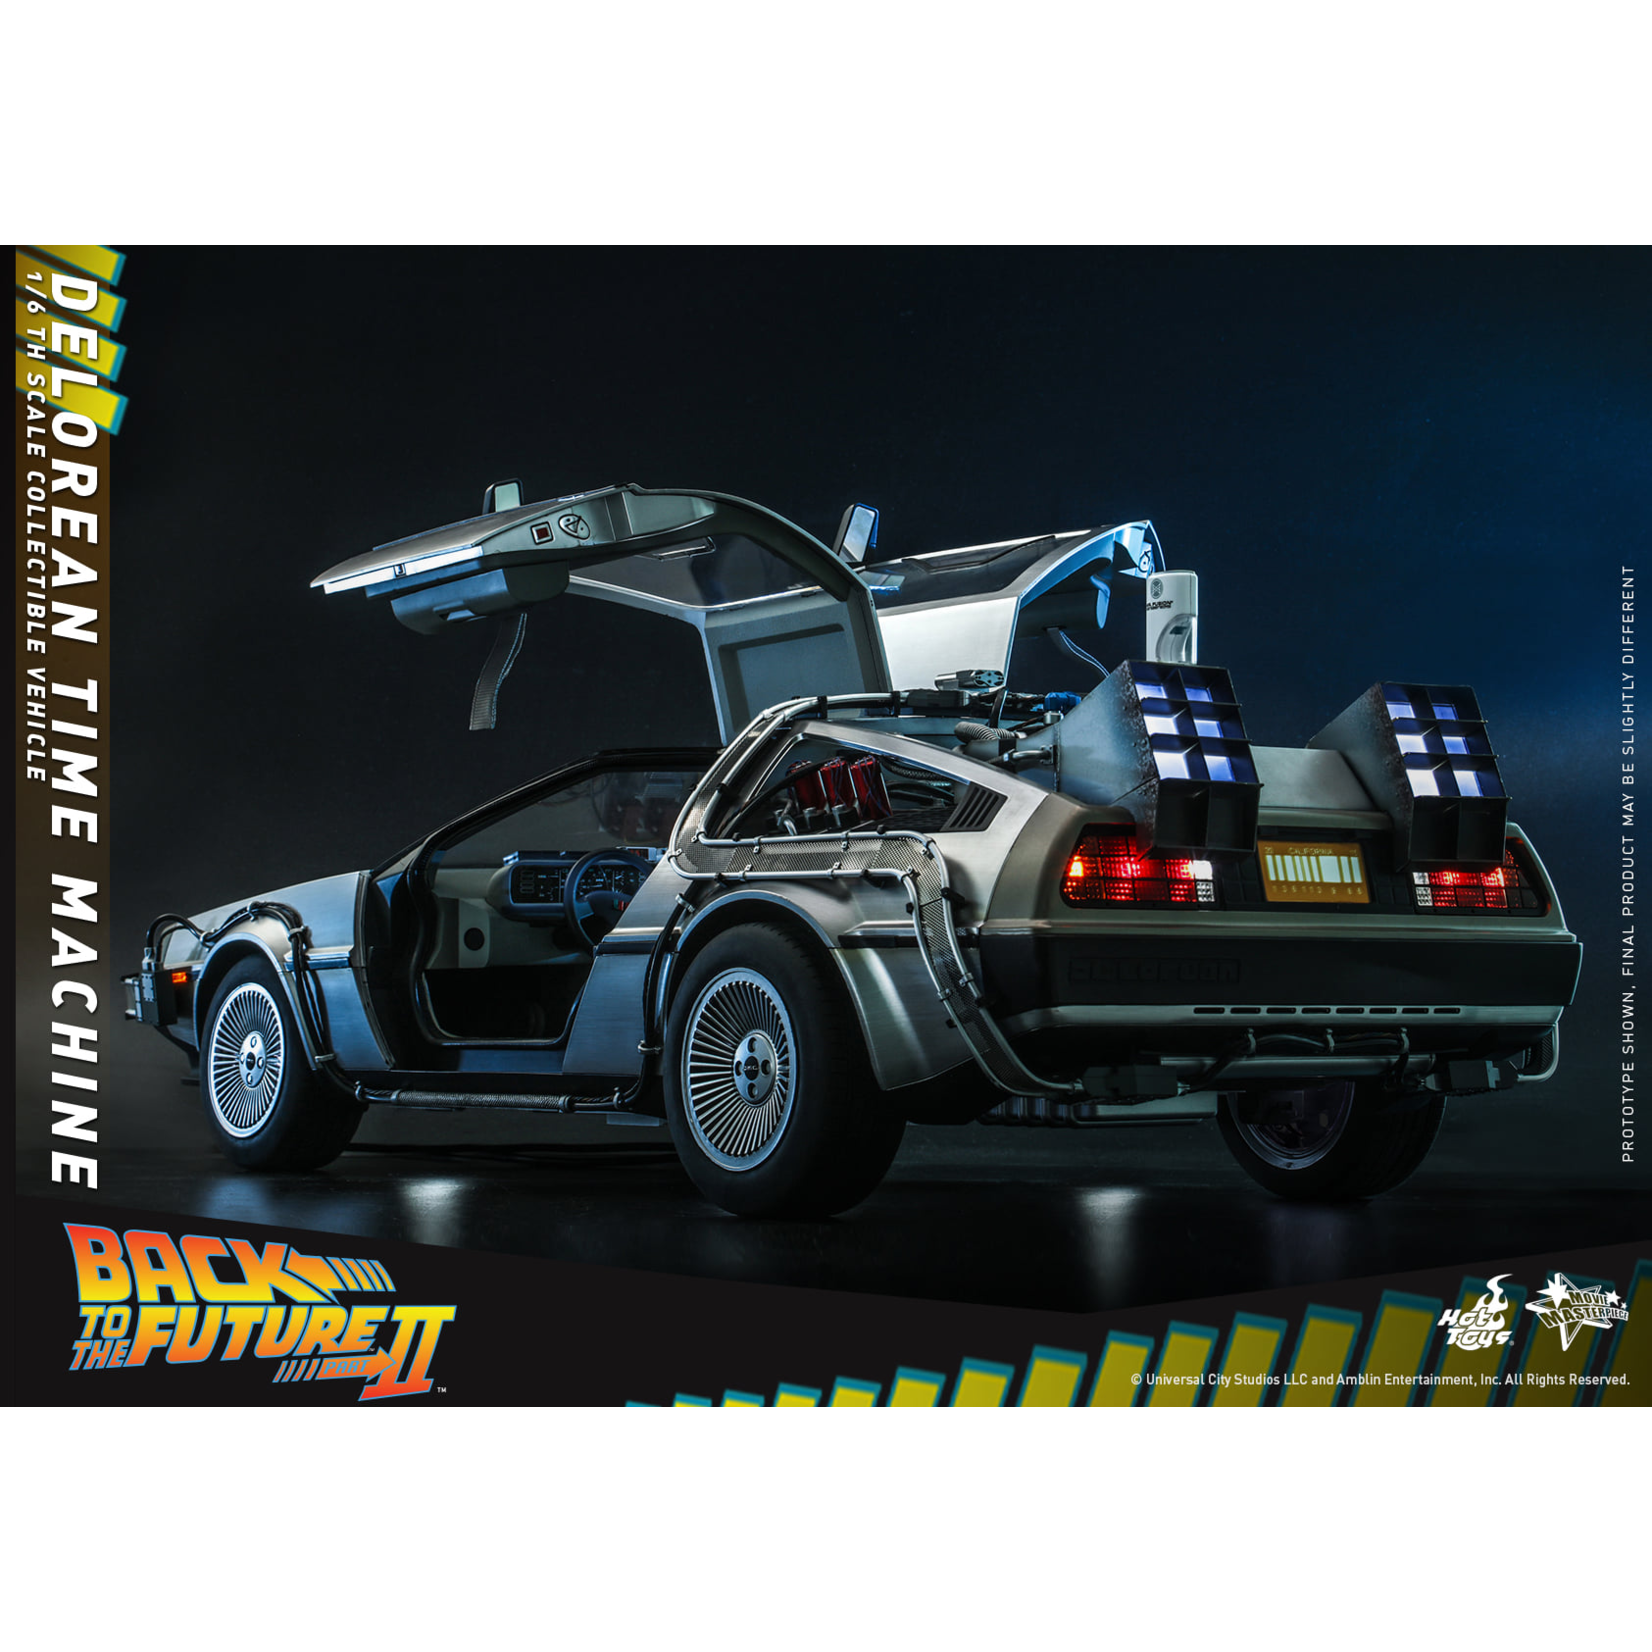 Hot Toys [Preorder] Hot Toys Back To The Future 2 -  Delorean Time Machine 1/6th Scale MMS636